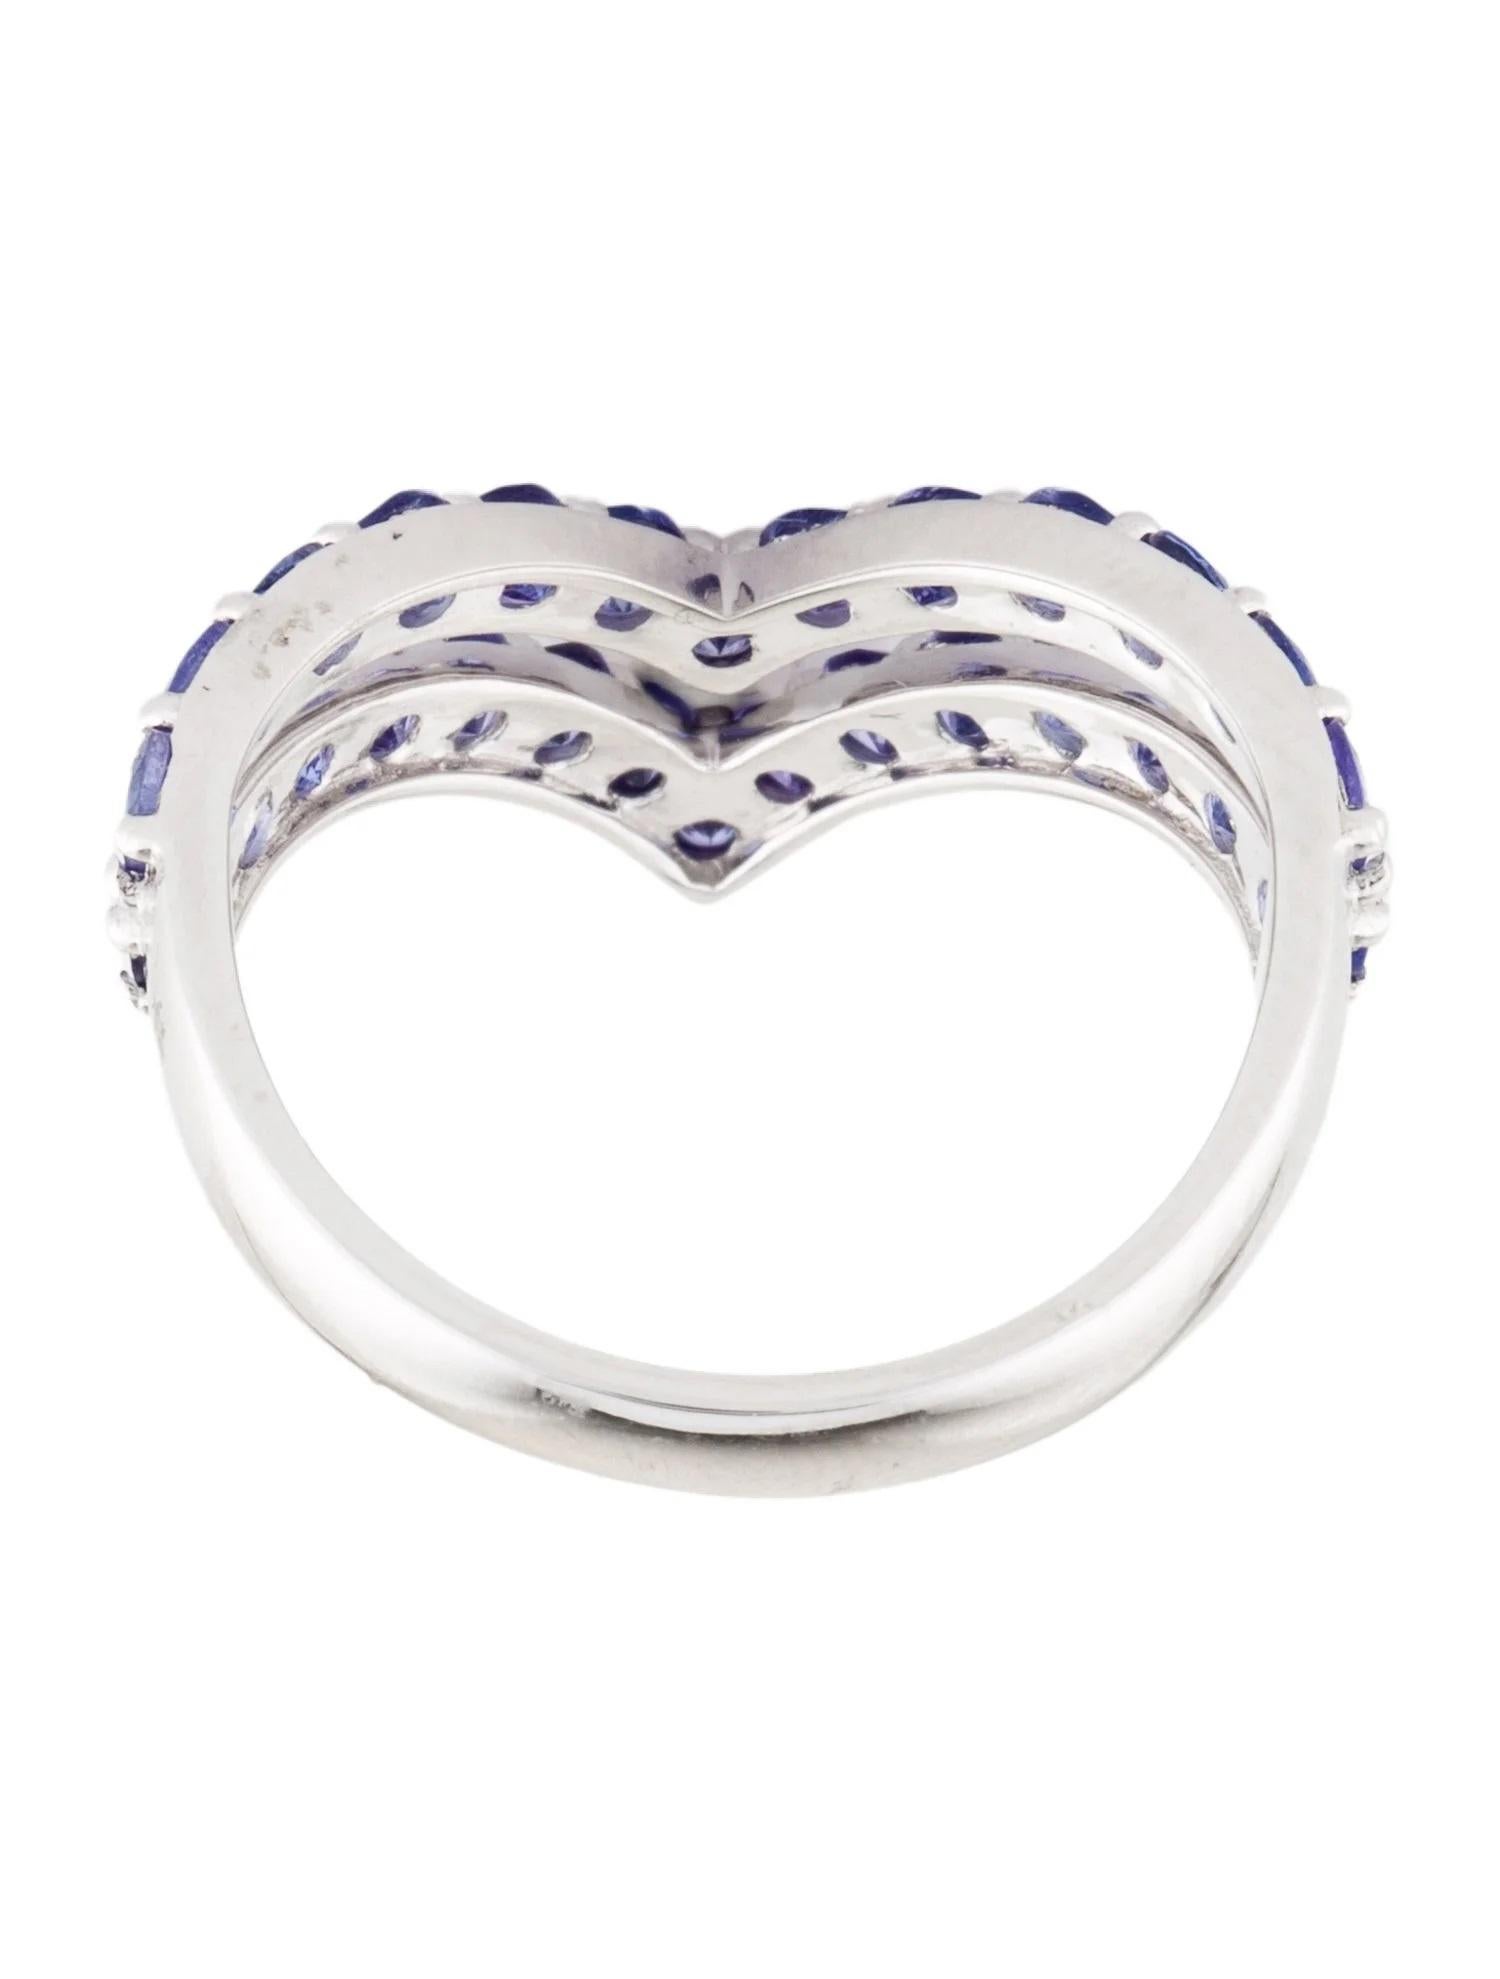 14K 2.00ctw Tanzanite V Band Size 7.5  Rhodium-Plated White Gold  Round In New Condition For Sale In Holtsville, NY